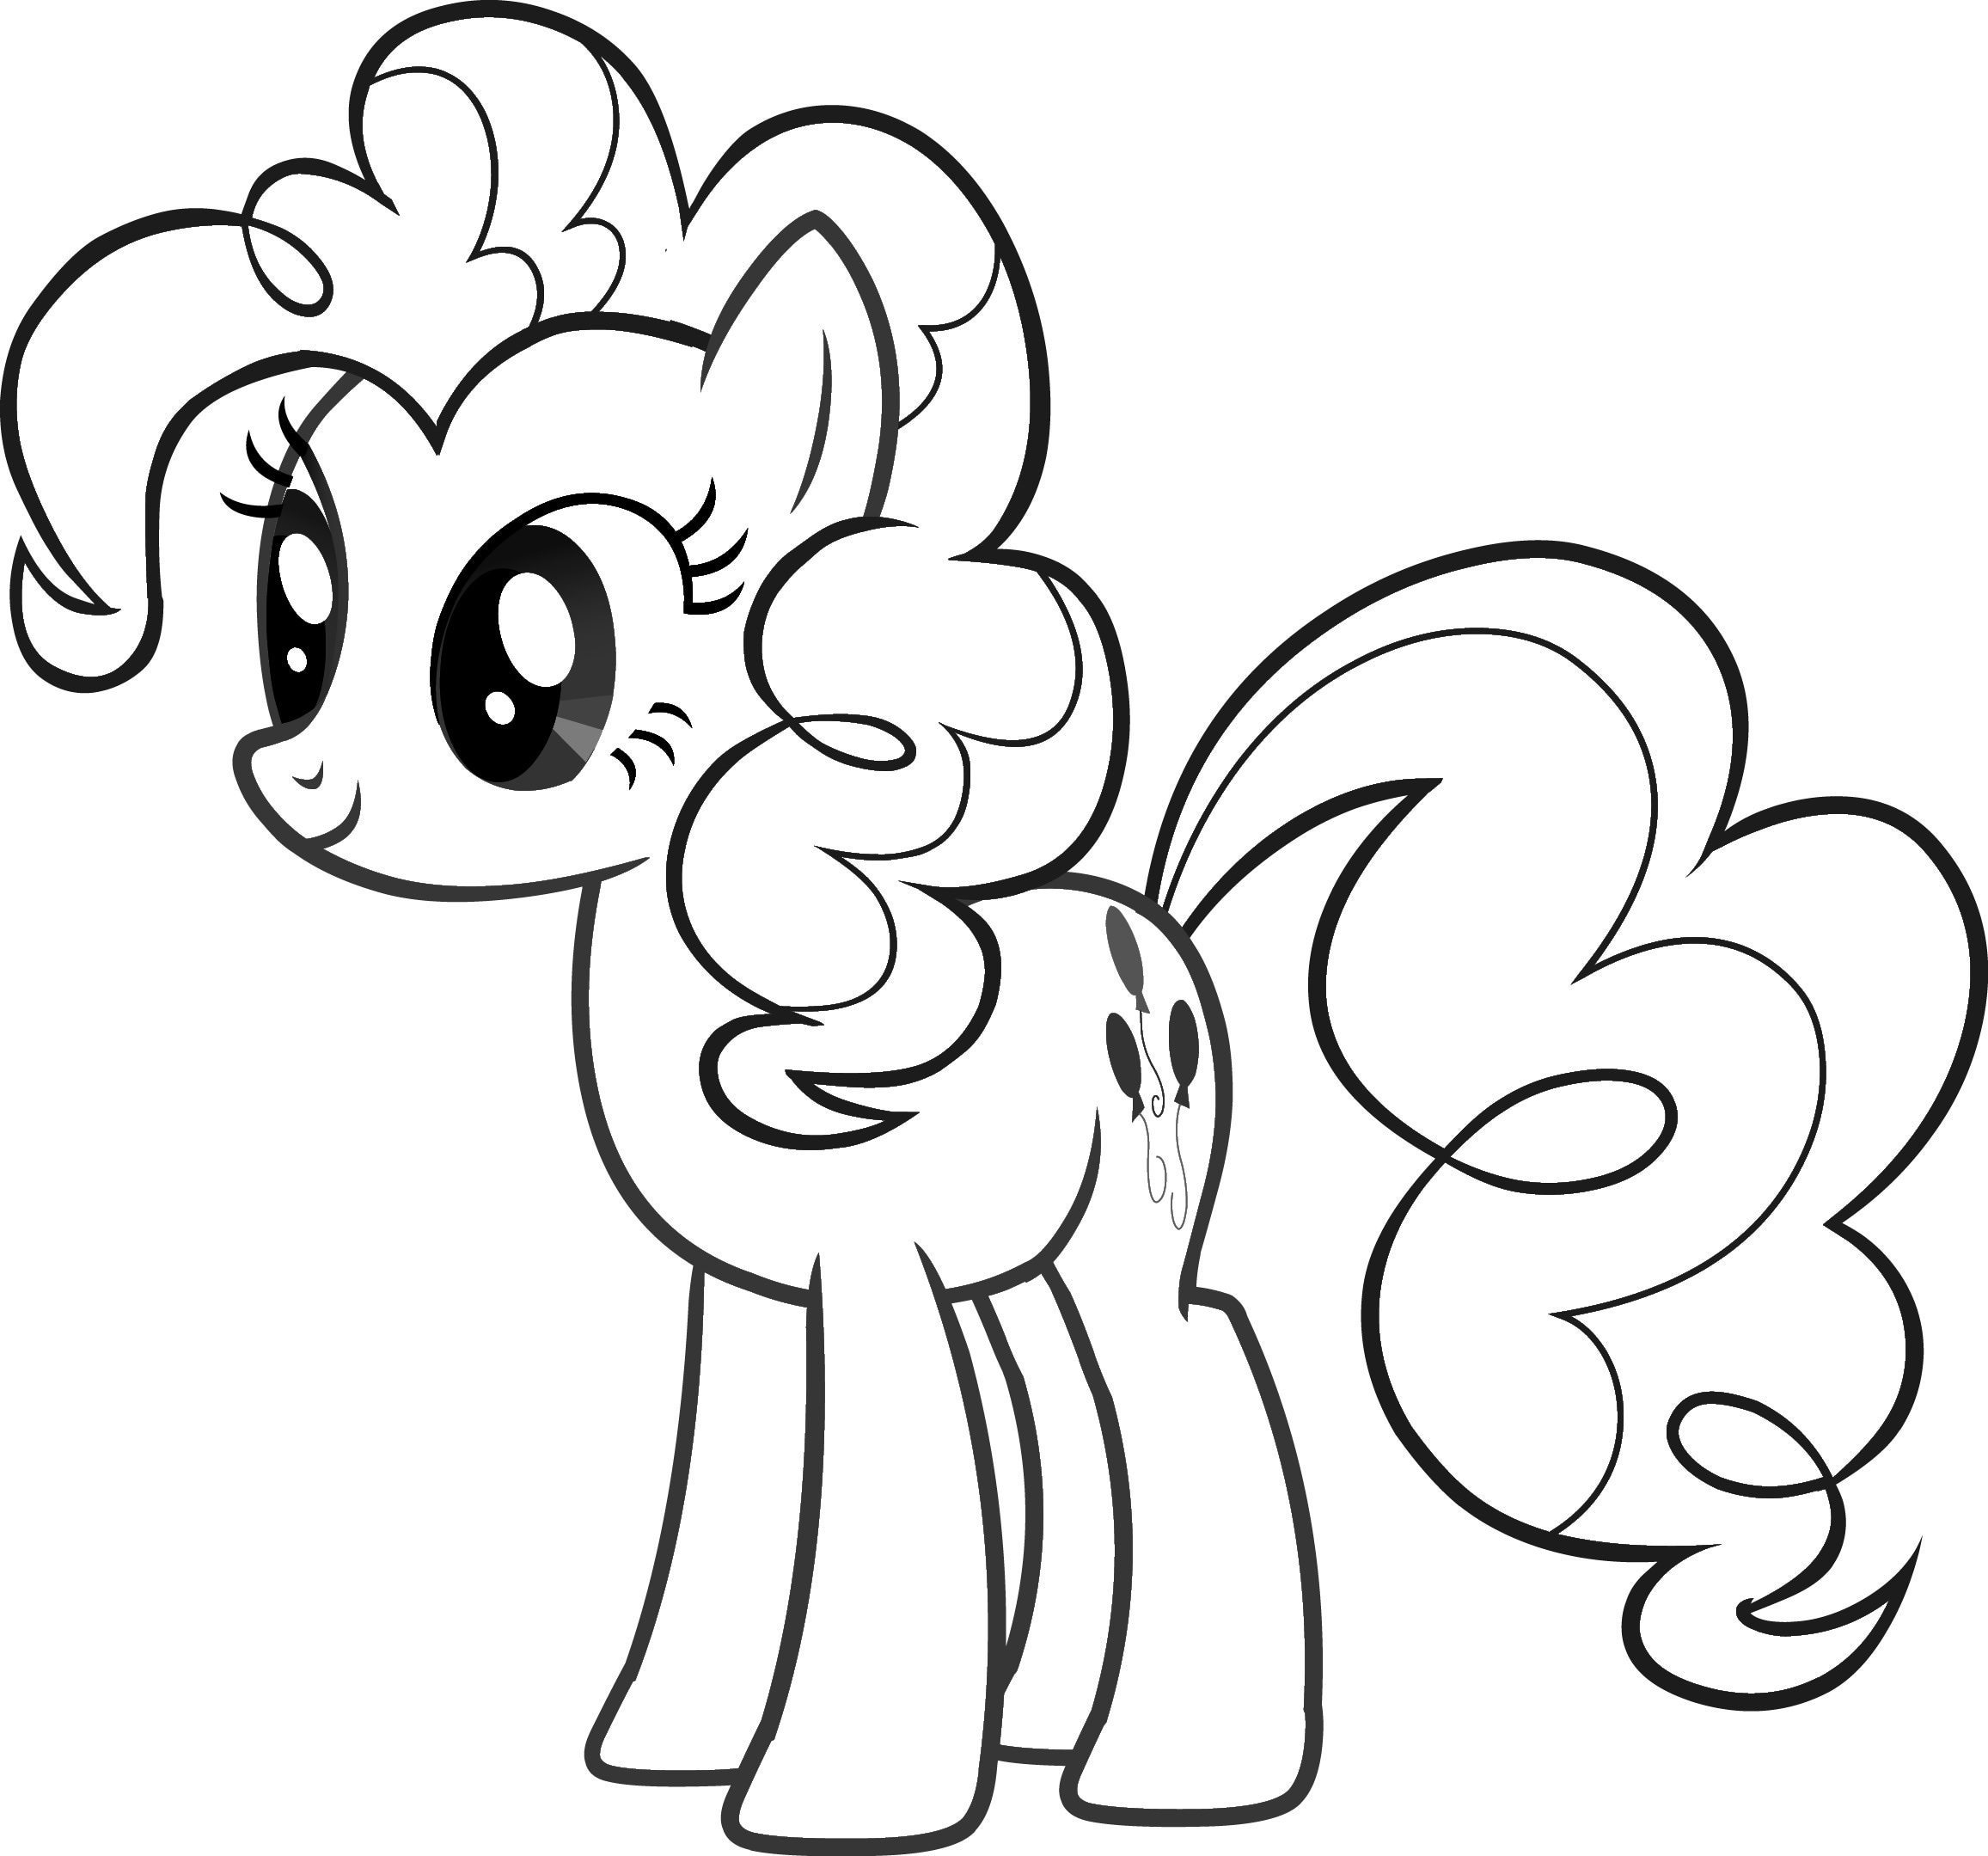 Free My Little Pony Pinkie Pie Coloring Page